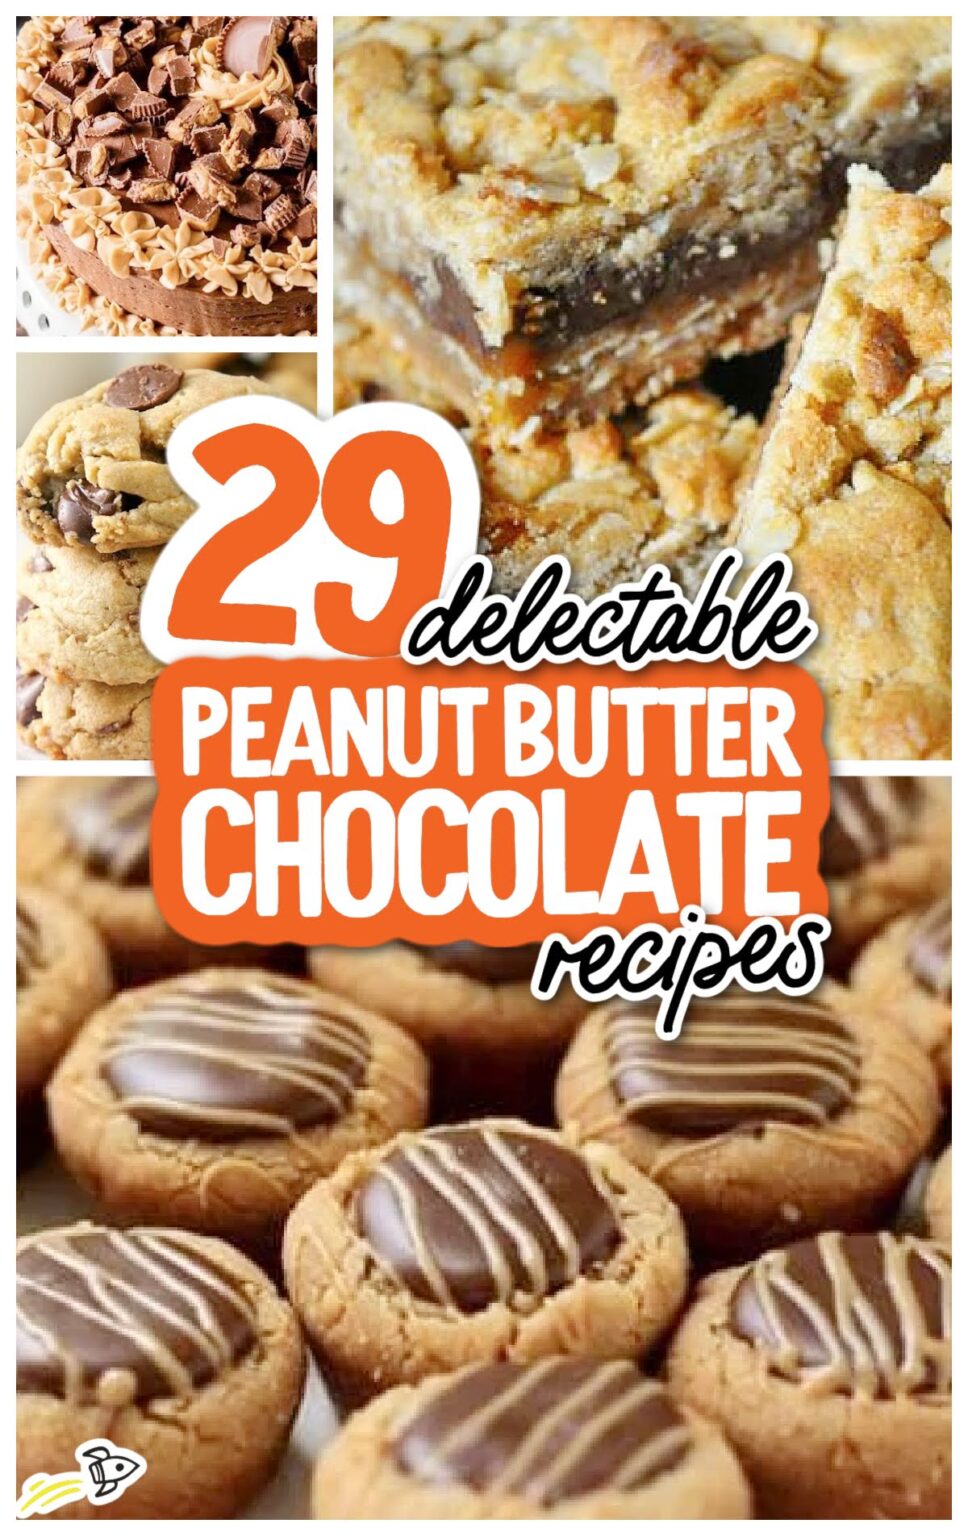 29 Delectable Peanut Butter Chocolate Recipes - Spaceships and Laser Beams